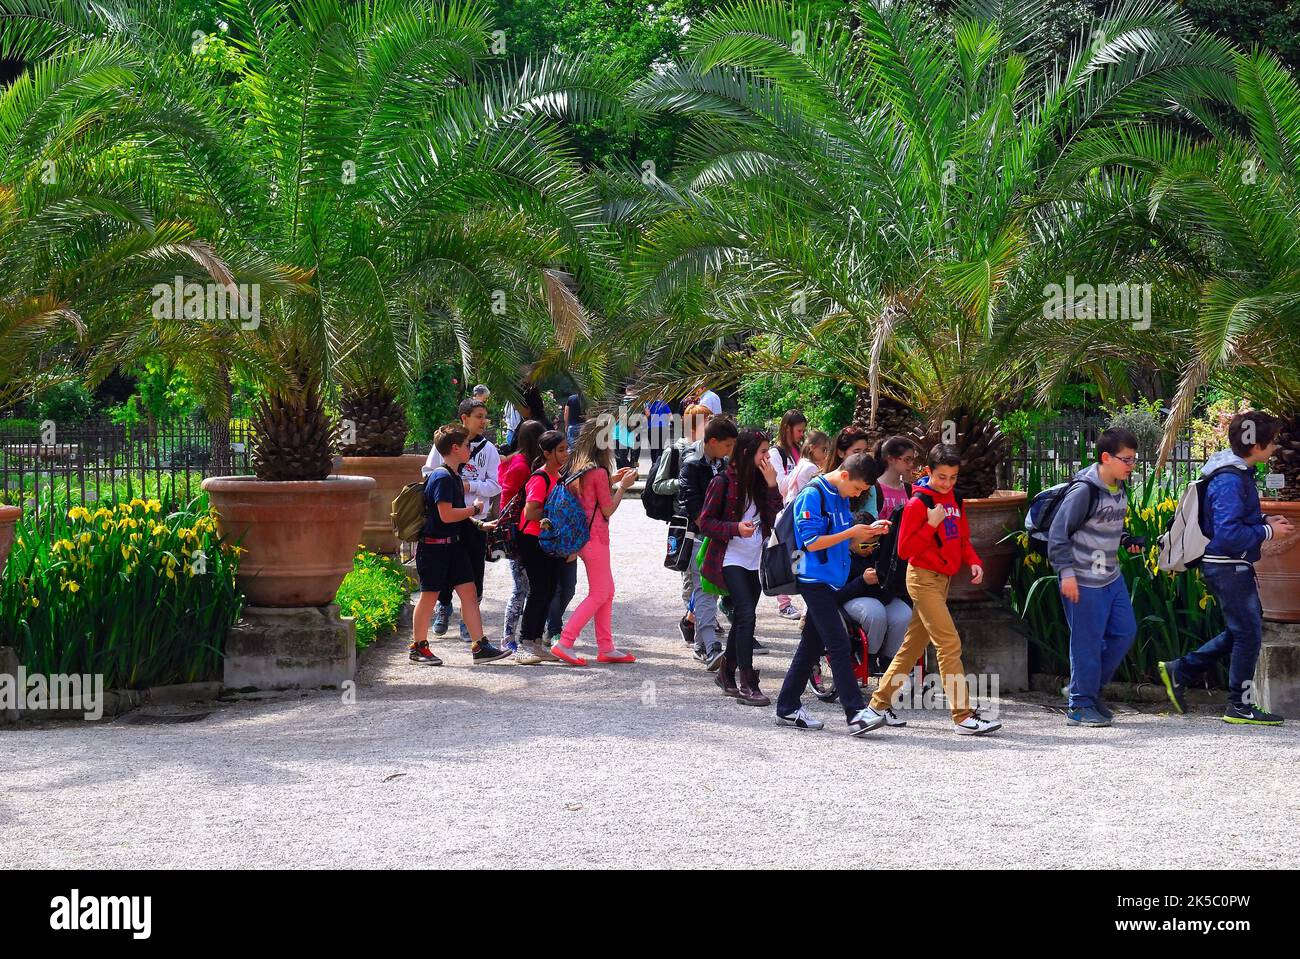 The University of Padua Botanical Garden. The Botanical Garden of the University of Padua was established in 1545 for the cultivation of medicinal plants. Schoolchildren visiting the botanical garden. Stock Photo